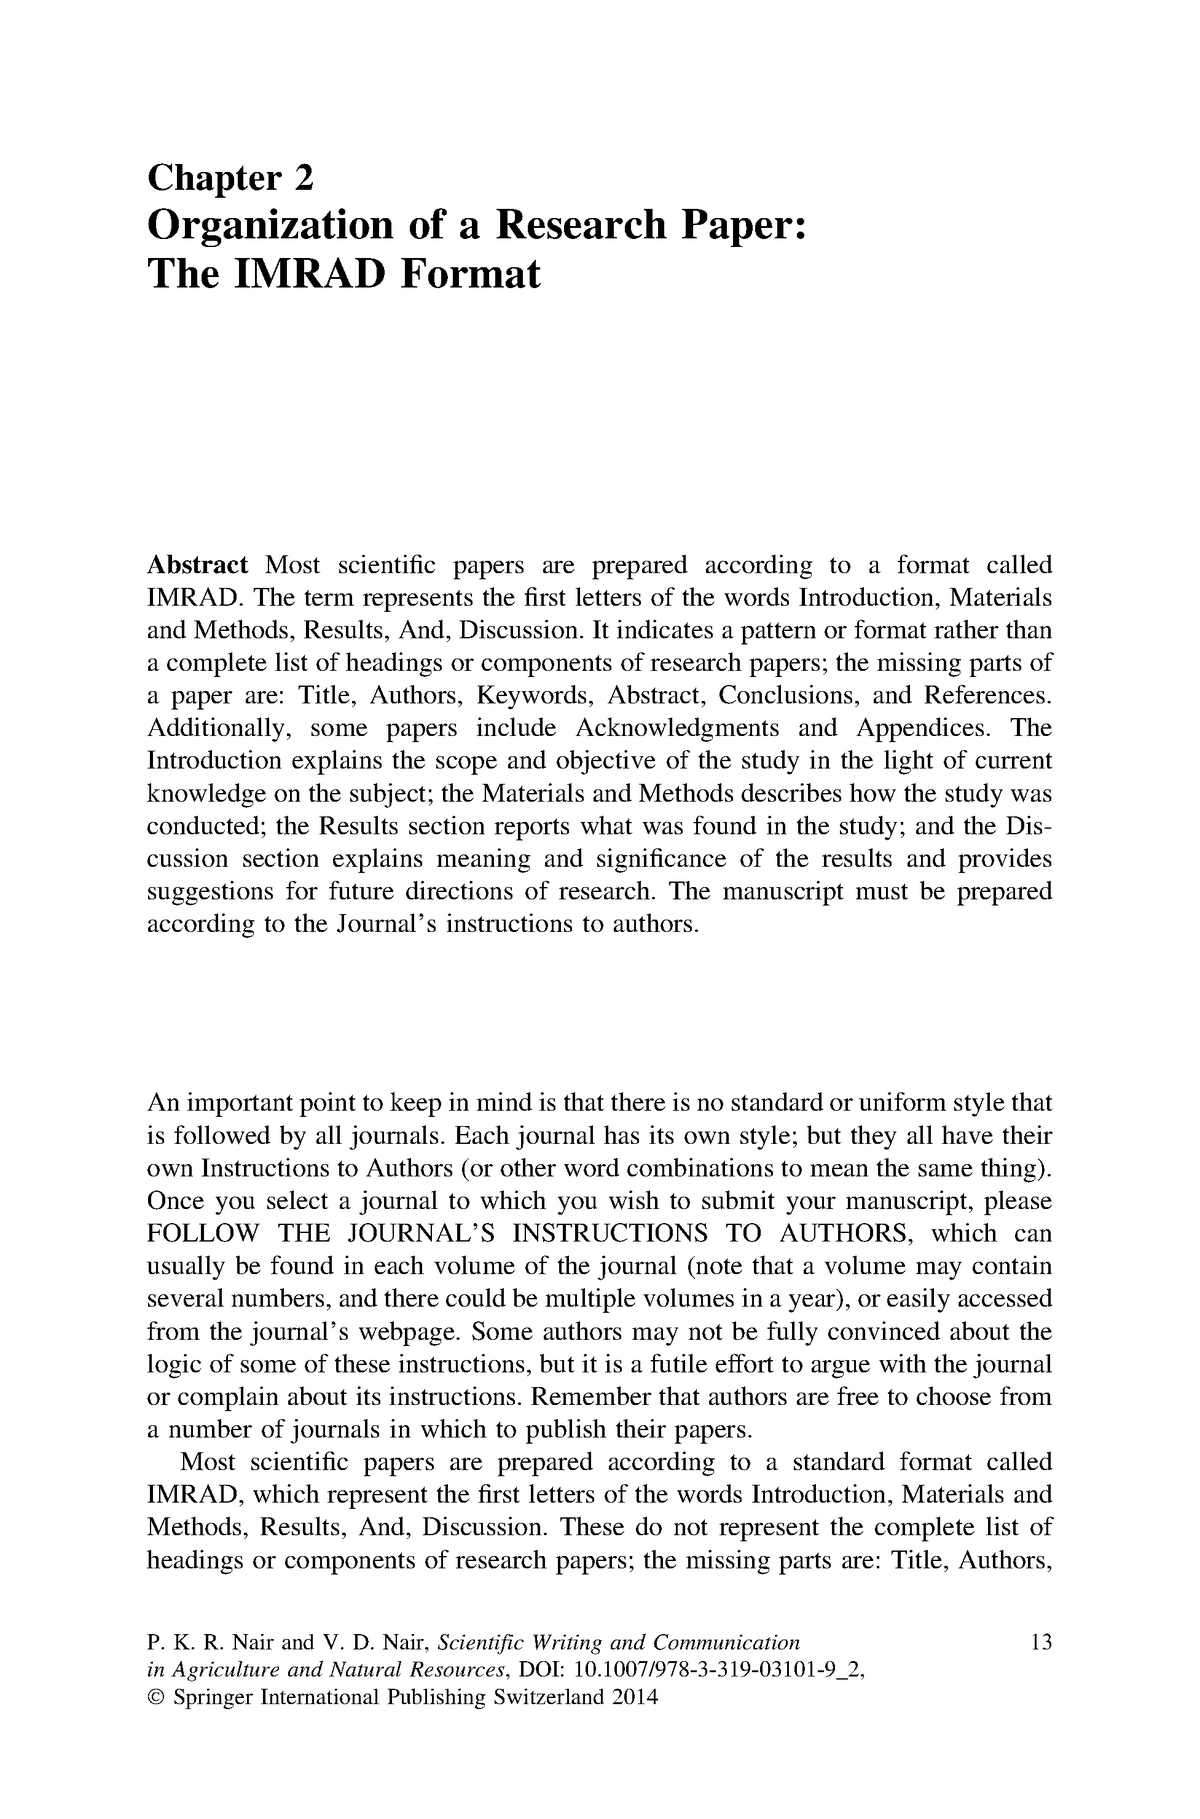 example of research paper in imrad format